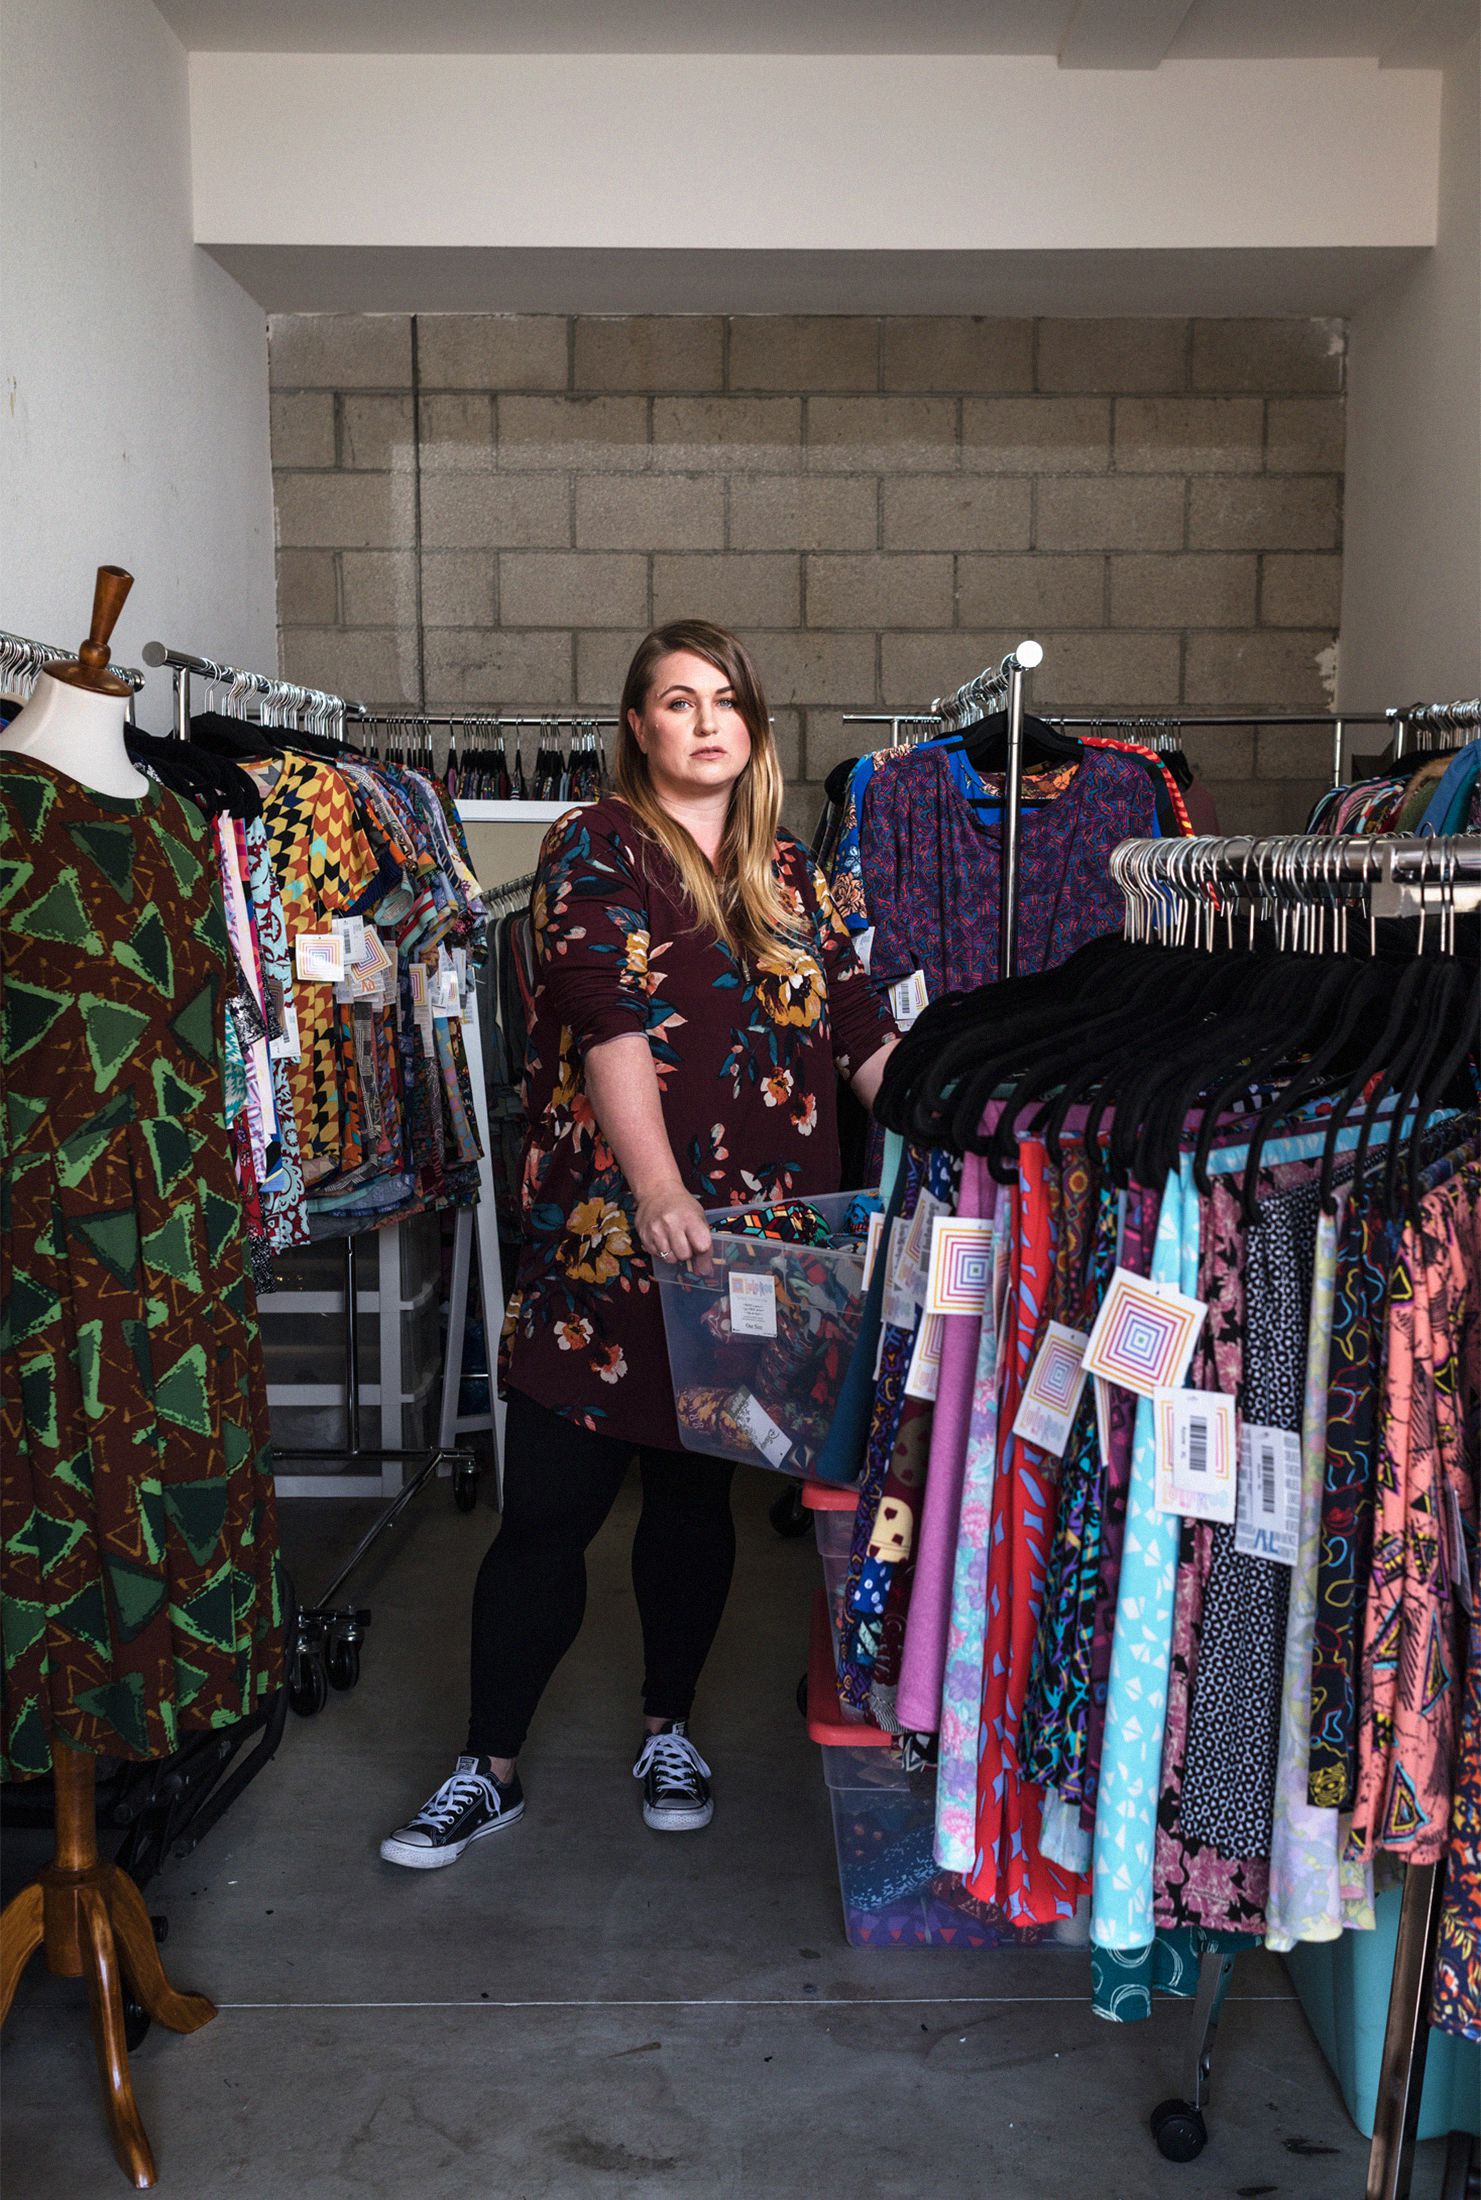 Thousands of Women Say LuLaRoe's Legging Empire Is a Scam - Bloomberg